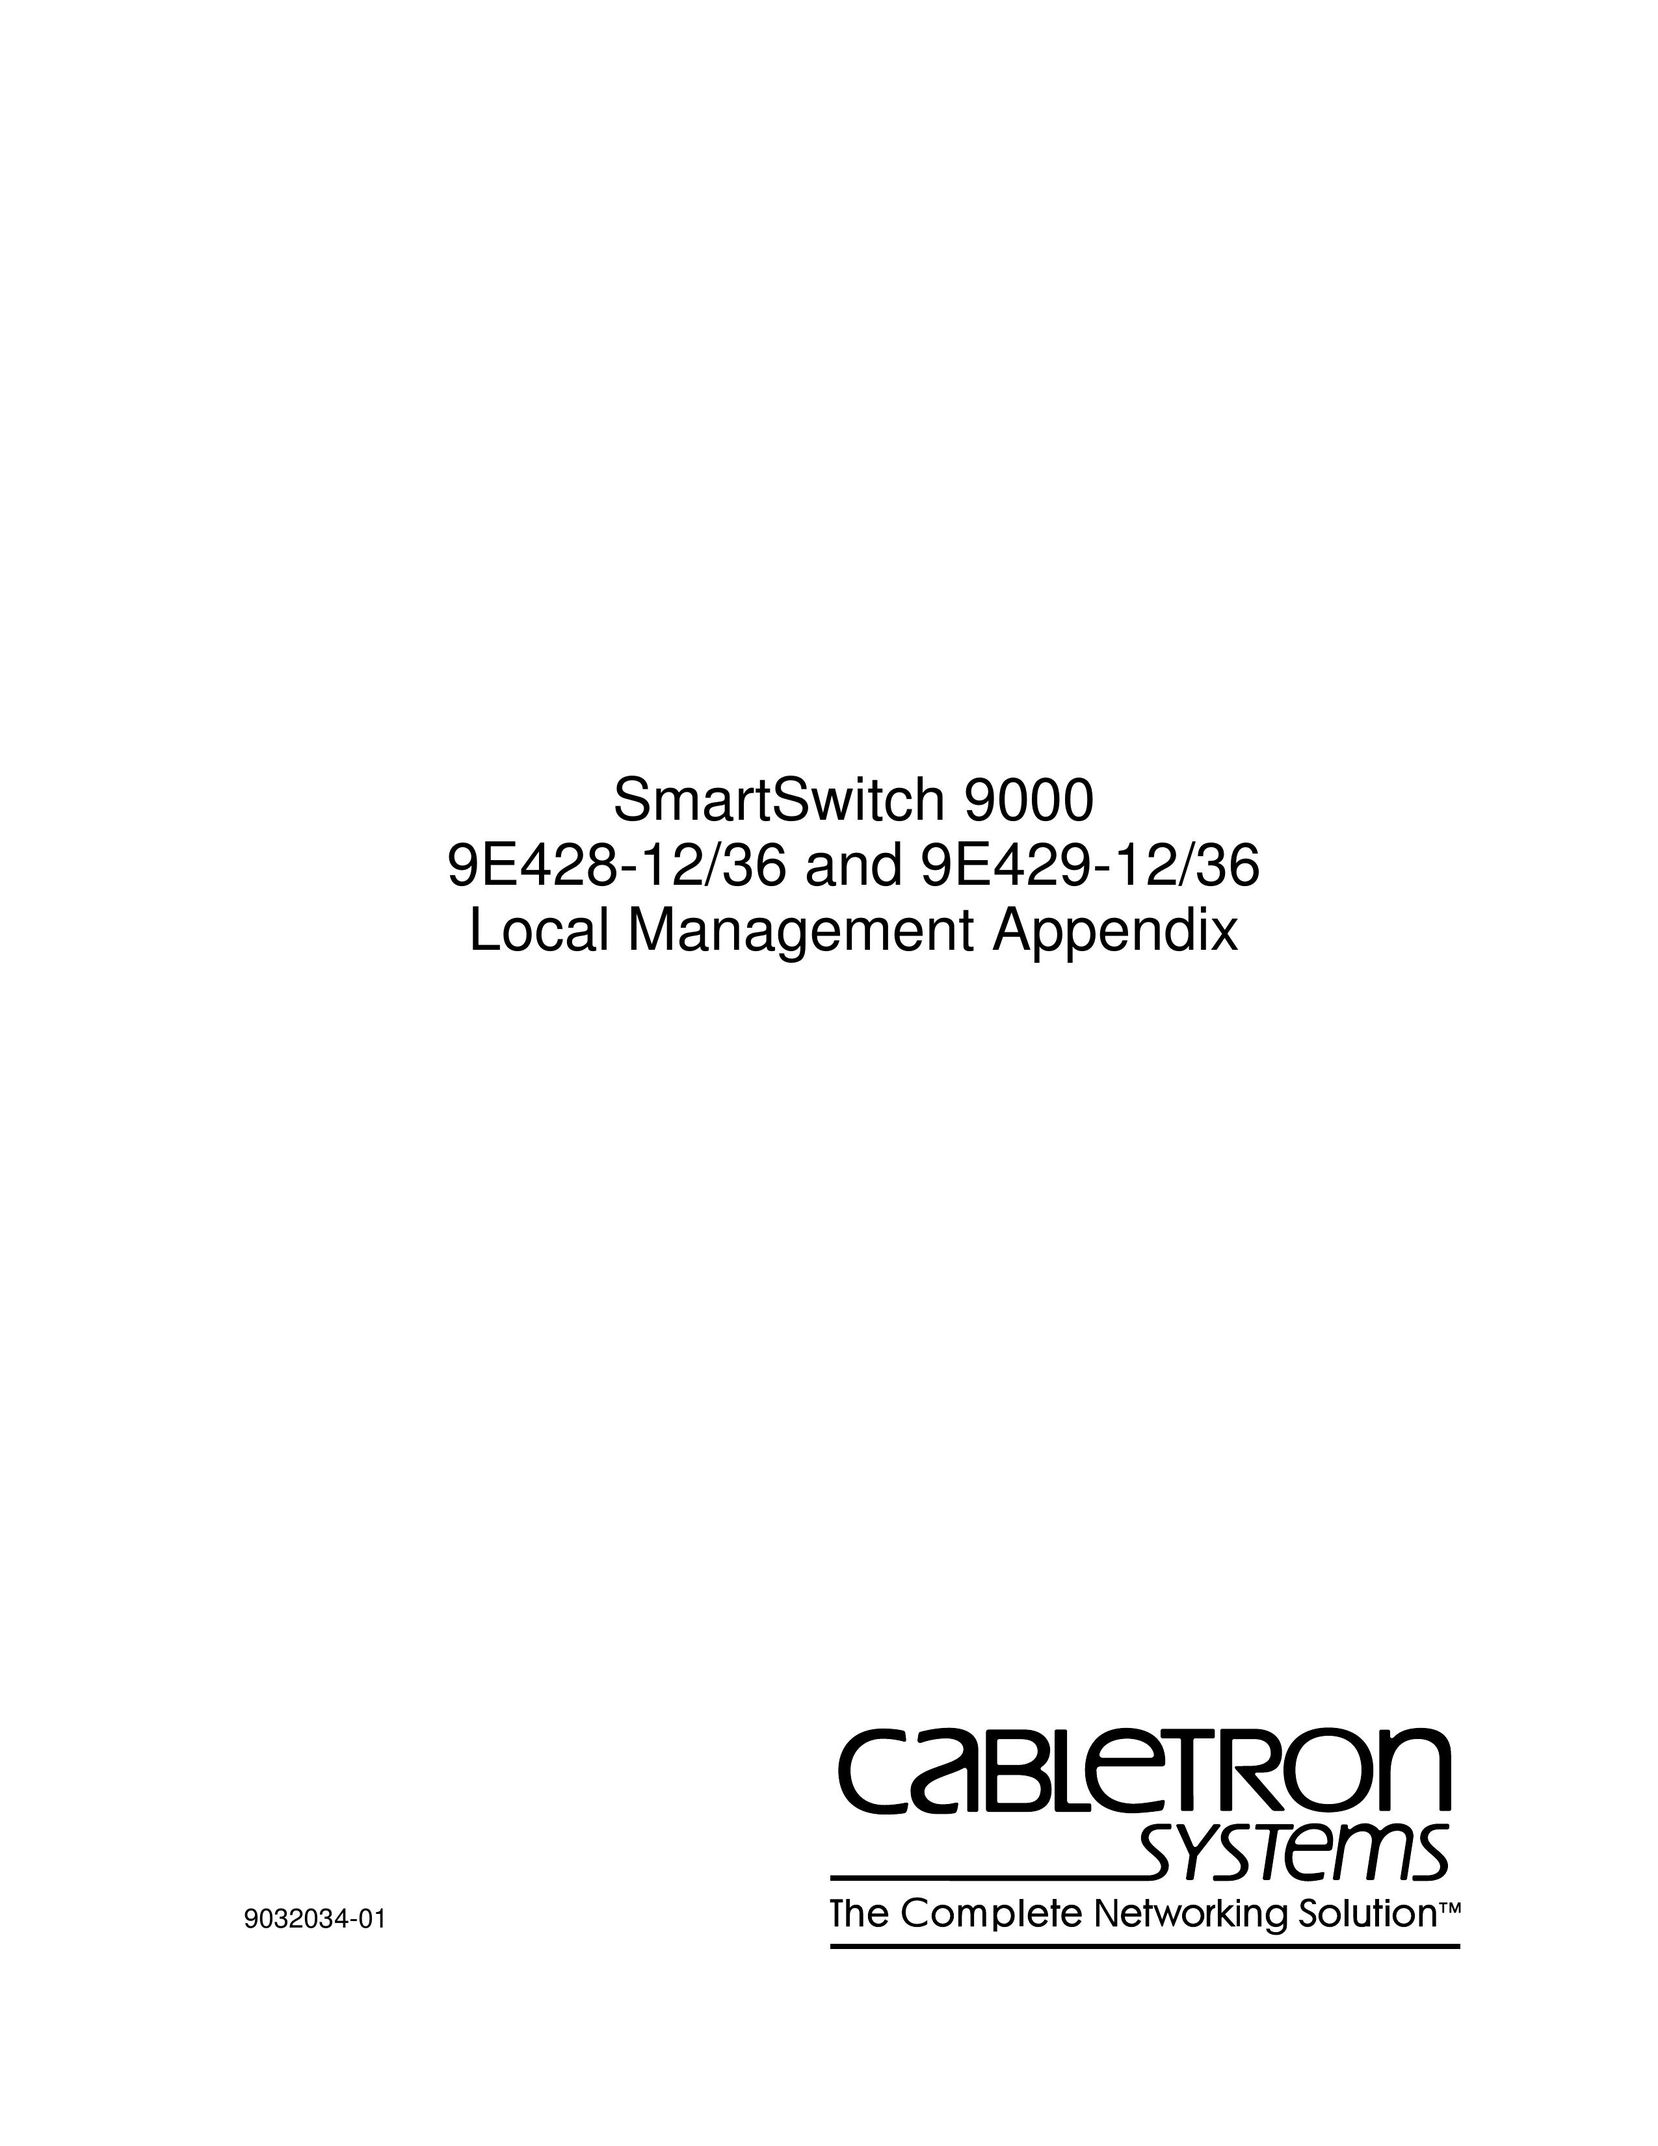 Cabletron Systems 9E429-36 Network Card User Manual